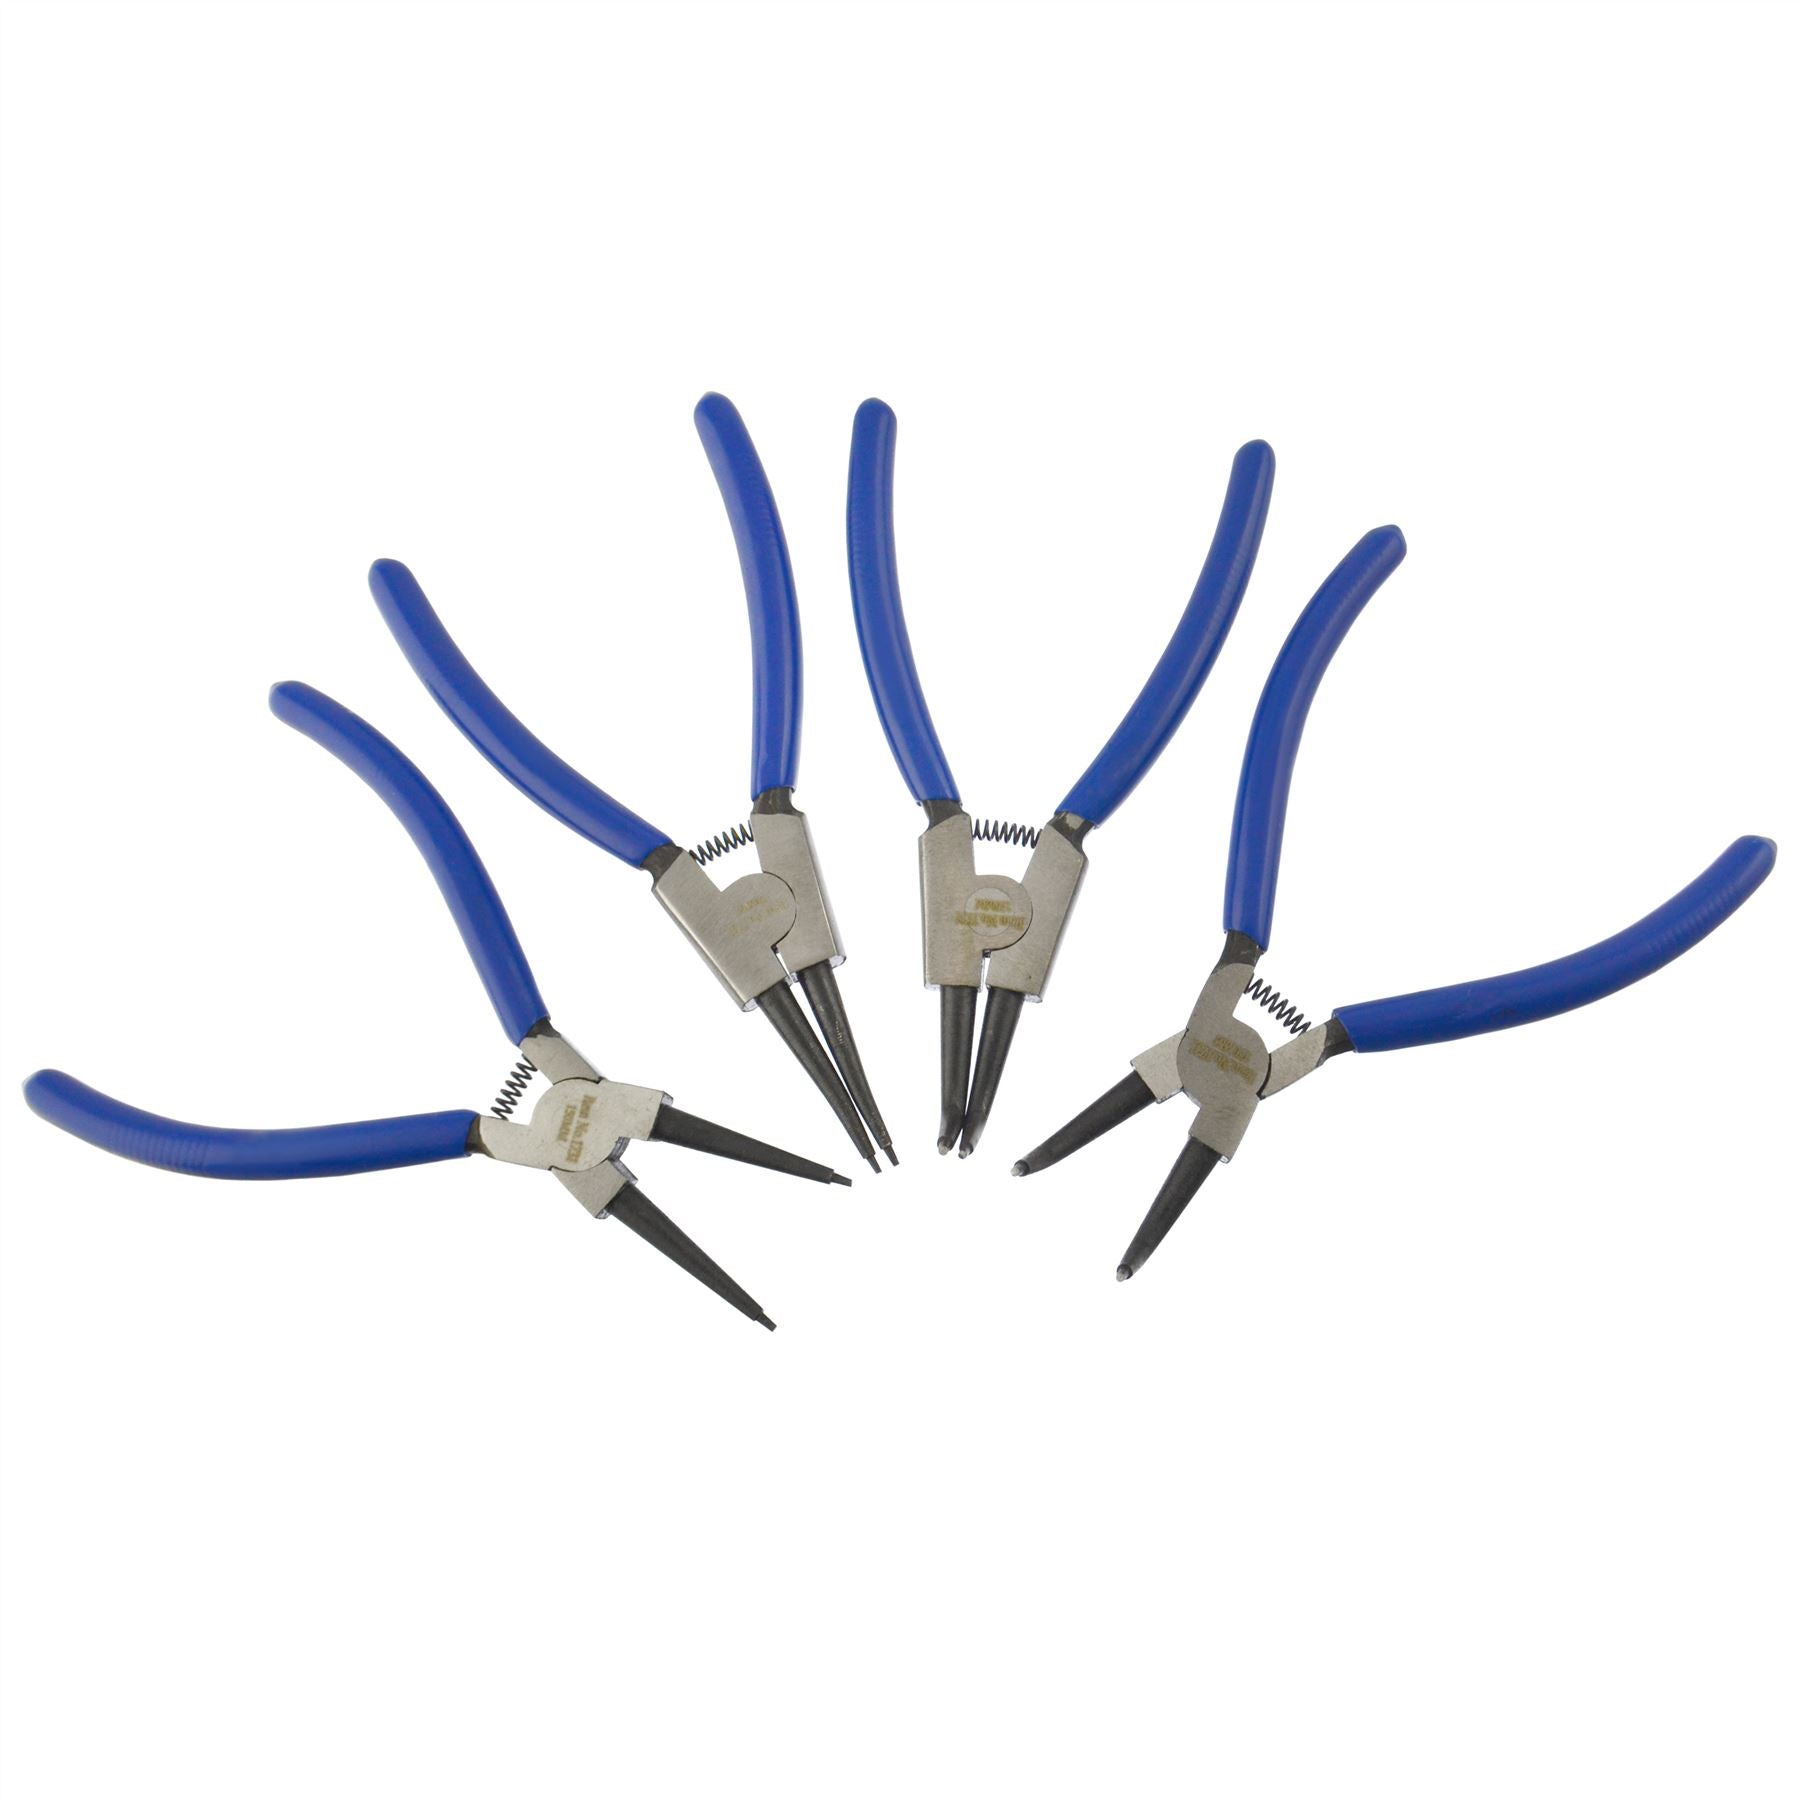 6" And 9" Circlip Plier Pliers Sets Internal and External / Bent and Straight